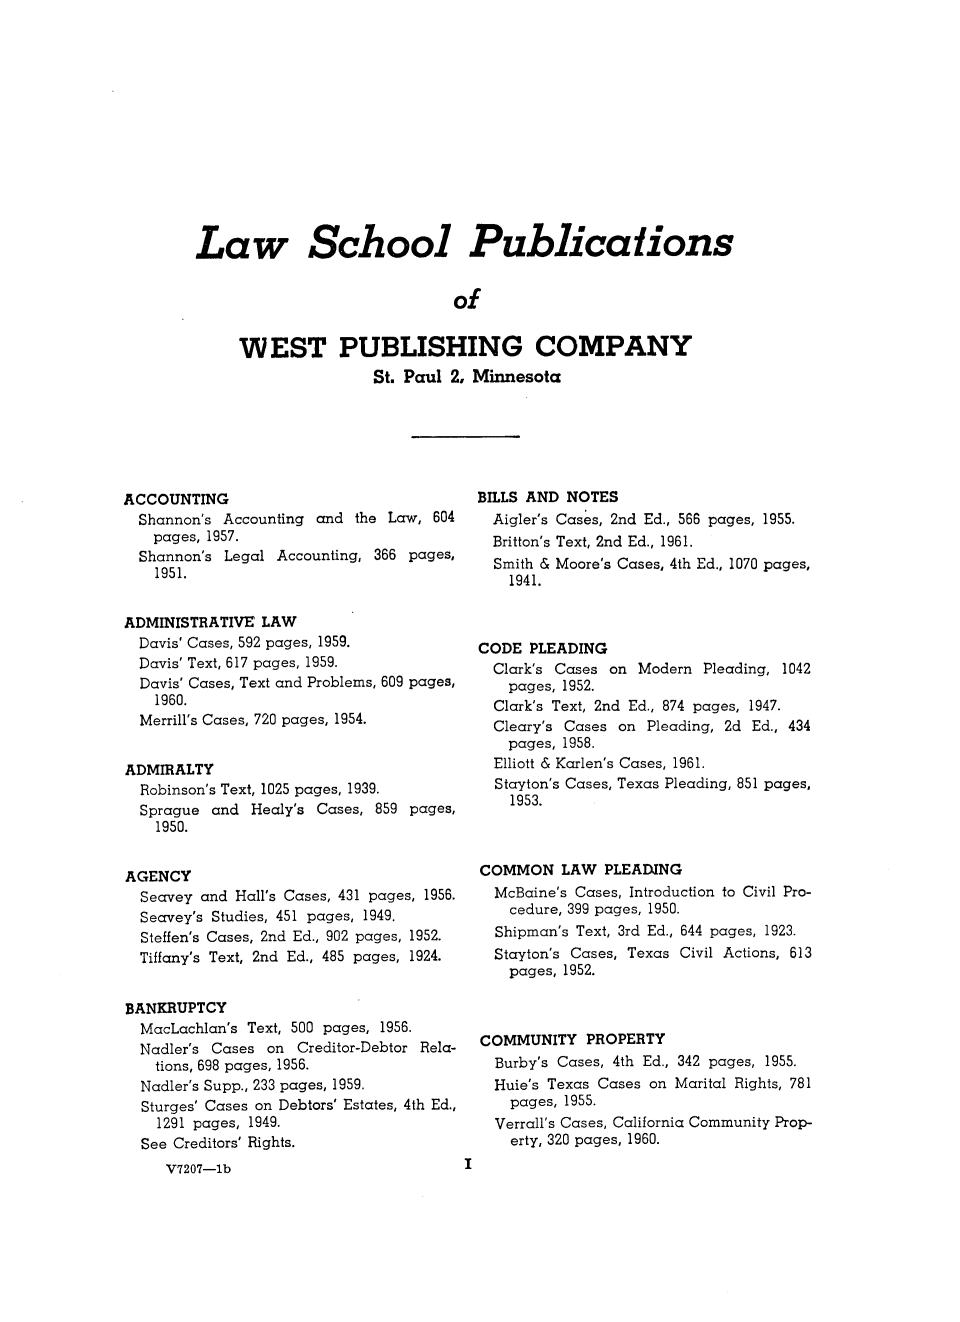 handle is hein.wacas/cmlawsl0001 and id is 1 raw text is: 














Law School Publications


                             of


     WEST PUBLISHING COMPANY
                    St. Paul 2, Minnesota


ACCOUNTING
  Shannon's Accounting and the Law, 604
  pages, 1957.
  Shannon's Legal Accounting, 366 pages,
    1951.


ADMINISTRATIVE  LAW
  Davis' Cases, 592 pages, 1959.
  Davis' Text, 617 pages, 1959.
  Davis' Cases, Text and Problems, 609 pages,
    1960.
  Merrill's Cases, 720 pages, 1954.


ADMIRALTY
  Robinson's Text, 1025 pages, 1939.
  Sprague and  Healy's Cases, 859 pages,
    1950.


AGENCY
  Seavey and Hall's Cases, 431 pages, 1956.
  Seavey's Studies, 451 pages, 1949.
  Steffen's Cases, 2nd Ed., 902 pages, 1952.
  Tiffany's Text, 2nd Ed., 485 pages, 1924.


BANKRUPTCY
  MacLachlan's Text, 500 pages, 1956.
  Nadler's Cases on Creditor-Debtor Rela-
    tions, 698 pages, 1956.
  Nadler's Supp., 233 pages, 1959.
  Sturges' Cases on Debtors' Estates, 4th Ed.,
    1291 pages, 1949.
  See Creditors' Rights.
     V7207-1b


BILLS AND NOTES
  Aigler's Cases, 2nd Ed., 566 pages, 1955.
  Britton's Text, 2nd Ed., 1961.
  Smith & Moore's Cases, 4th Ed., 1070 pages,
    1941.



CODE  PLEADING
  Clark's Cases on Modern Pleading, 1042
    pages, 1952.
  Clark's Text, 2nd Ed., 874 pages, 1947.
  Cleary's Cases on Pleading, 2d Ed., 434
  pages,  1958.
  Elliott & Karlen's Cases, 1961.
  Stayton's Cases, Texas Pleading, 851 pages,
    1953.



COMMON LAW PLEADING
  McBaine's Cases, Introduction to Civil Pro-
    cedure, 399 pages, 1950.
  Shipman's Text, 3rd Ed., 644 pages, 1923.
  Stayton's Cases, Texas Civil Actions, 613
    pages, 1952.



COMMUNITY   PROPERTY
  Burby's Cases, 4th Ed., 342 pages, 1955.
  Huie's Texas Cases on Marital Rights, 781
    pages, 1955.
  Verrall's Cases, California Community Prop-
    erty, 320 pages, 1960.


I


